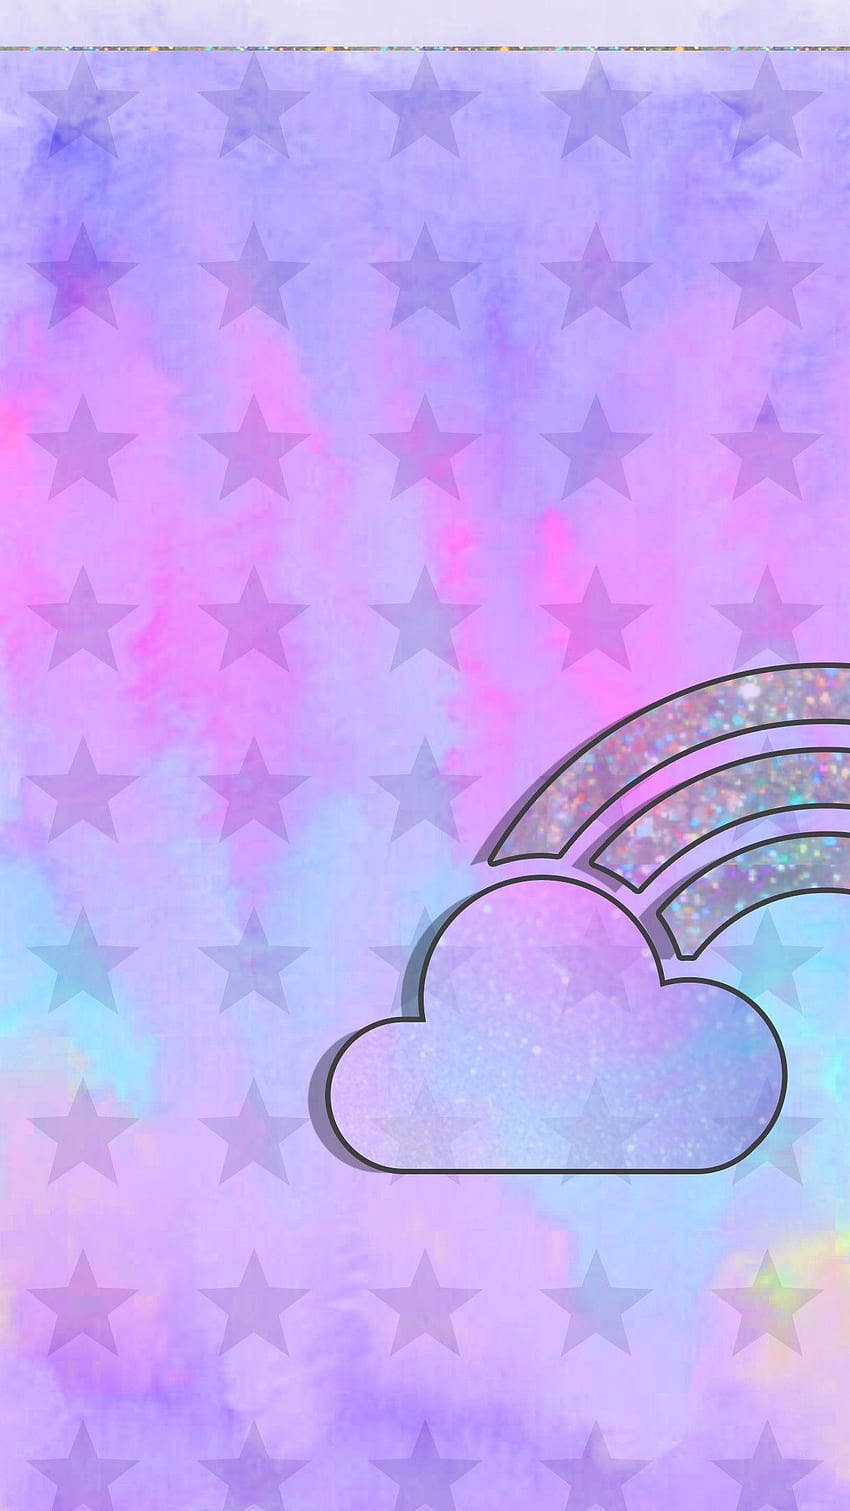 Cloud Cute Girly iPhone iPhone Android iridescent purple pink HD phone wallpaper